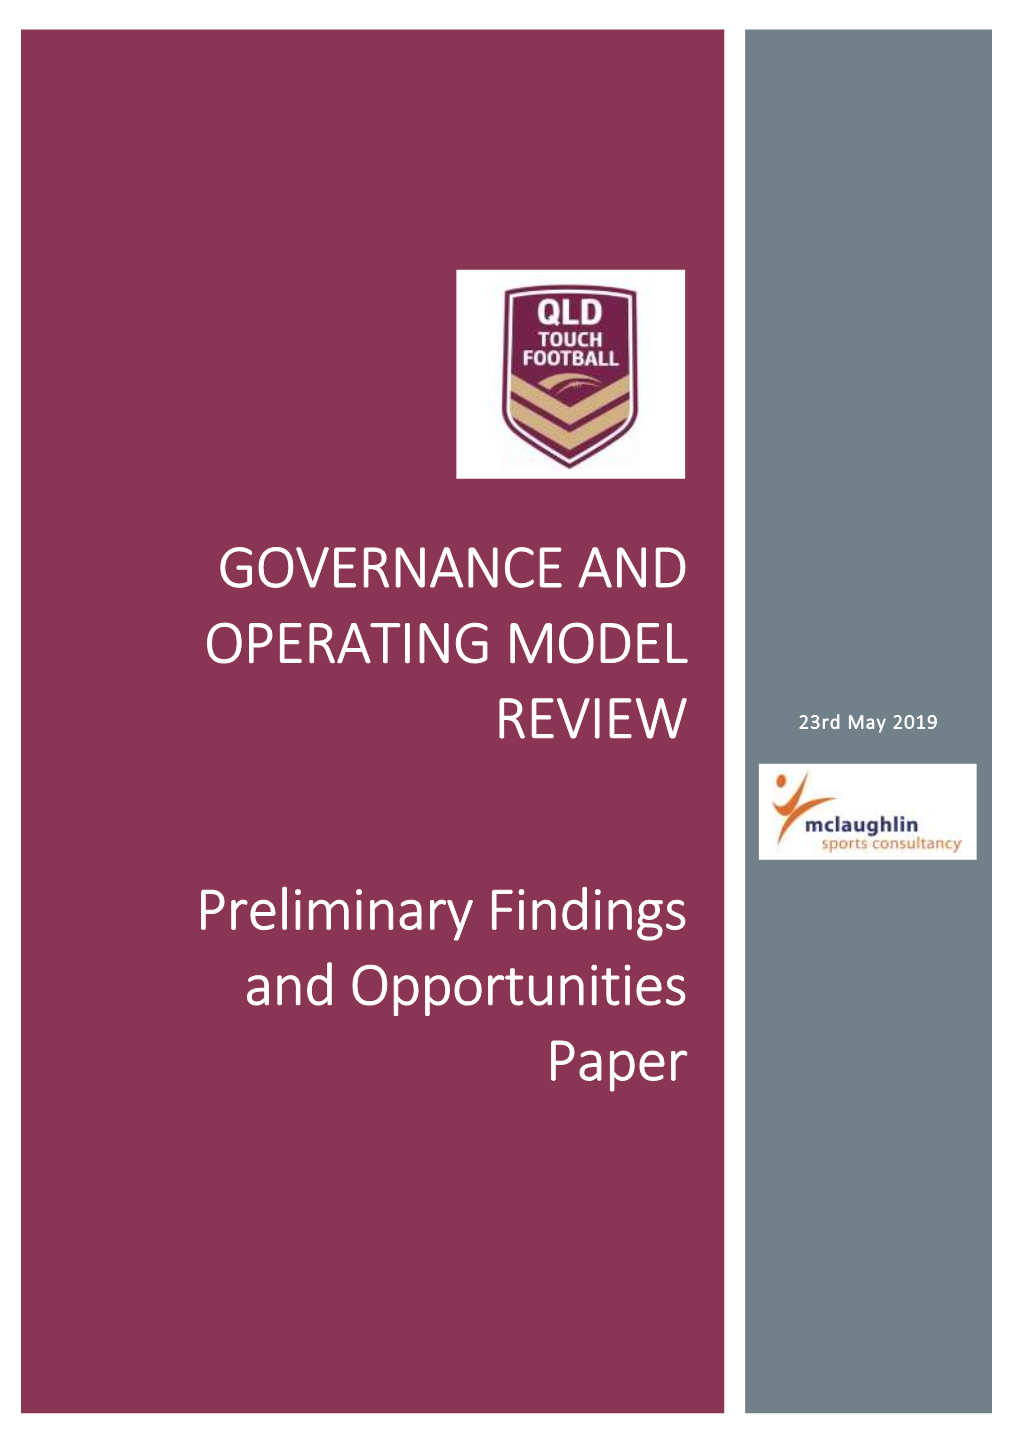 Preliminary Findings and Opportunities Paper